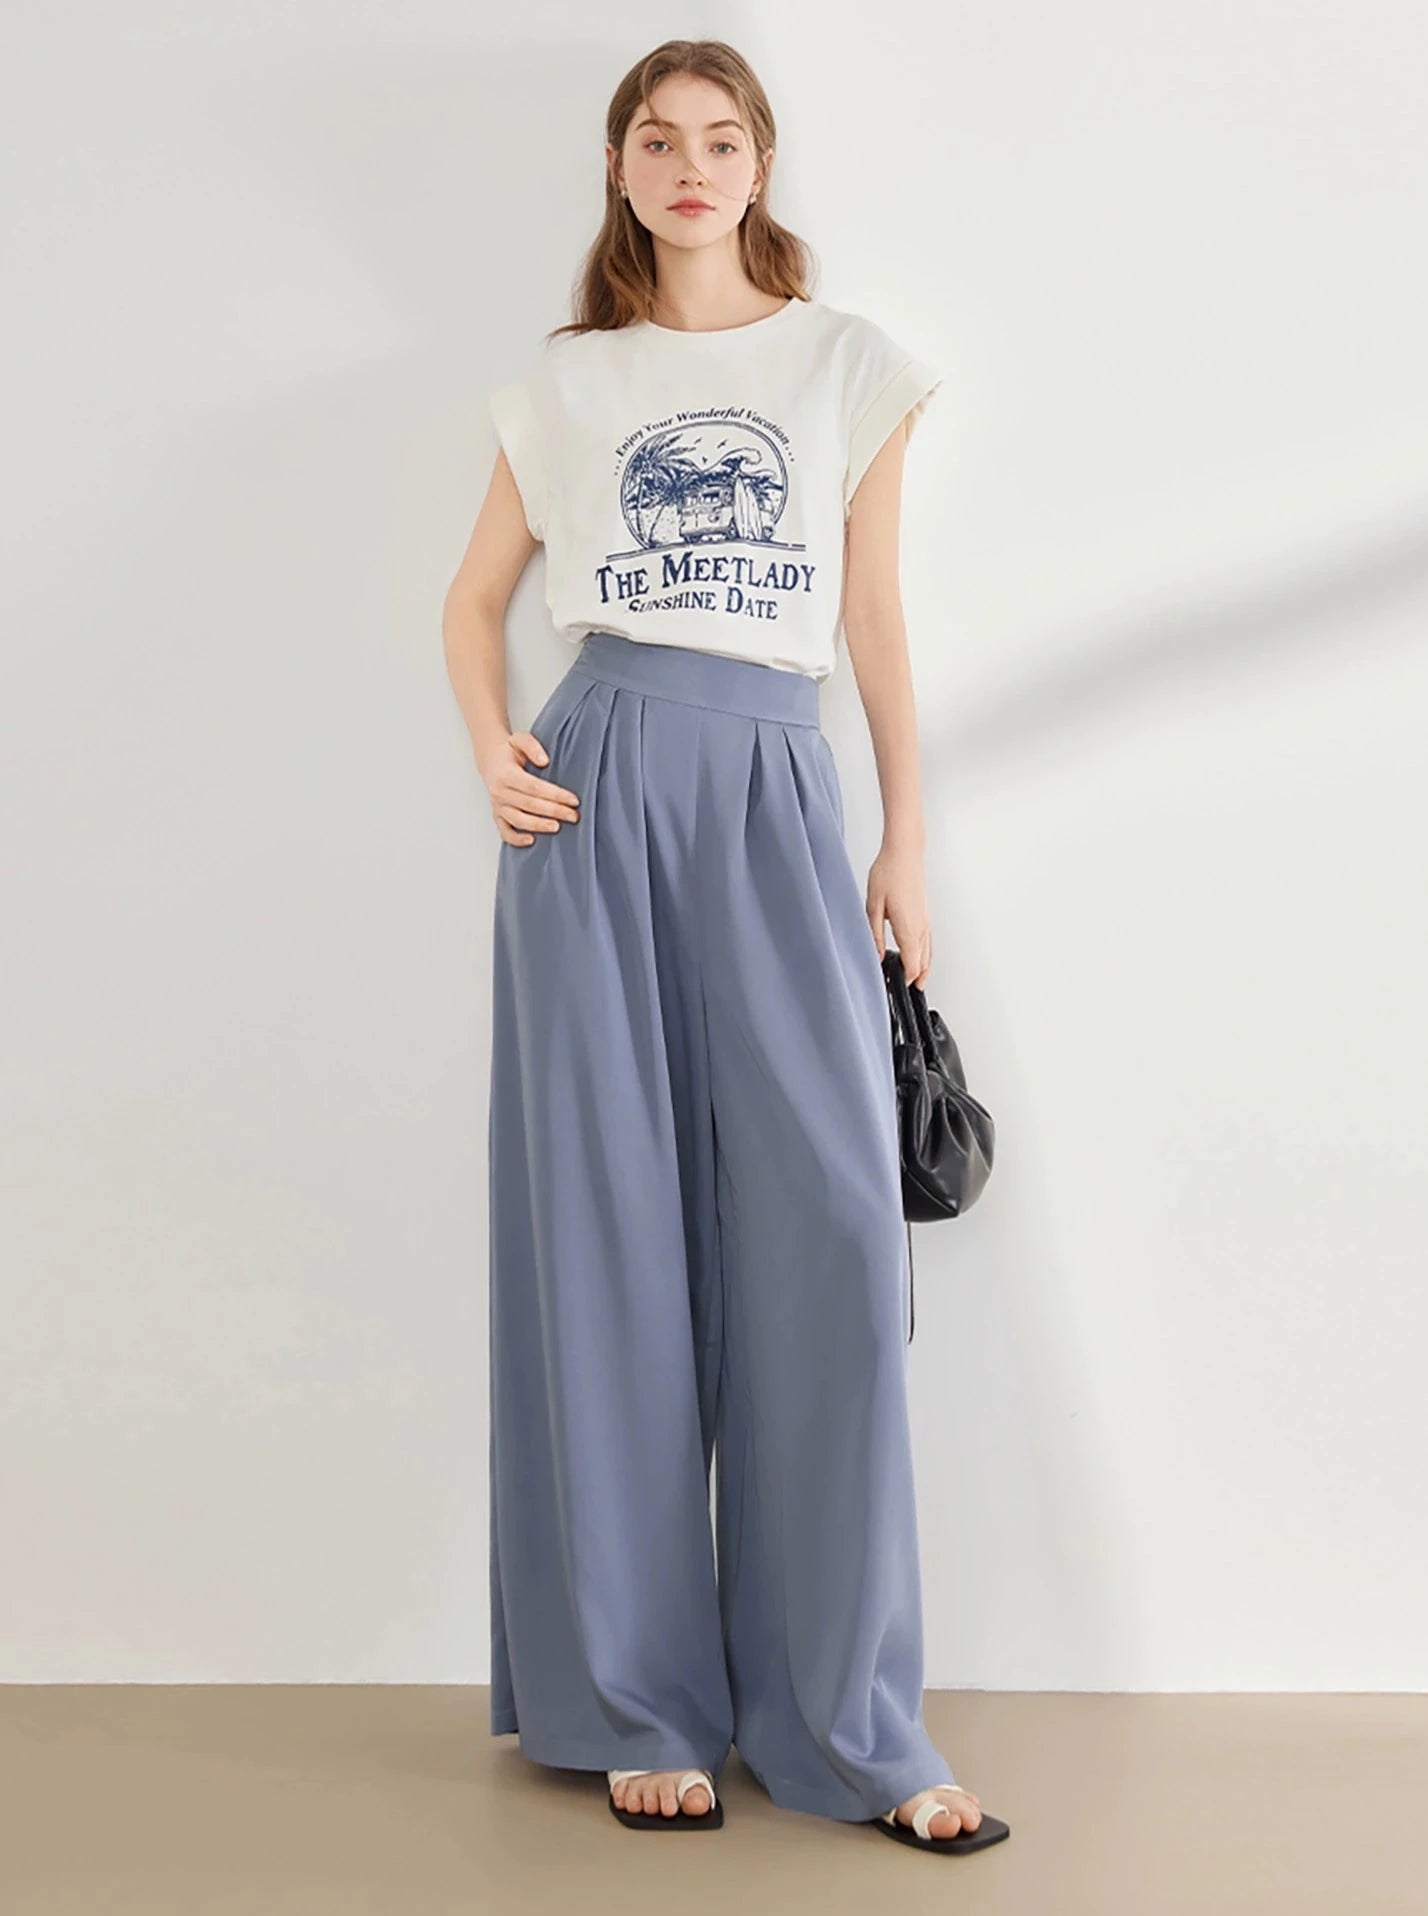 Relaxed Wide-Leg Casual Pants